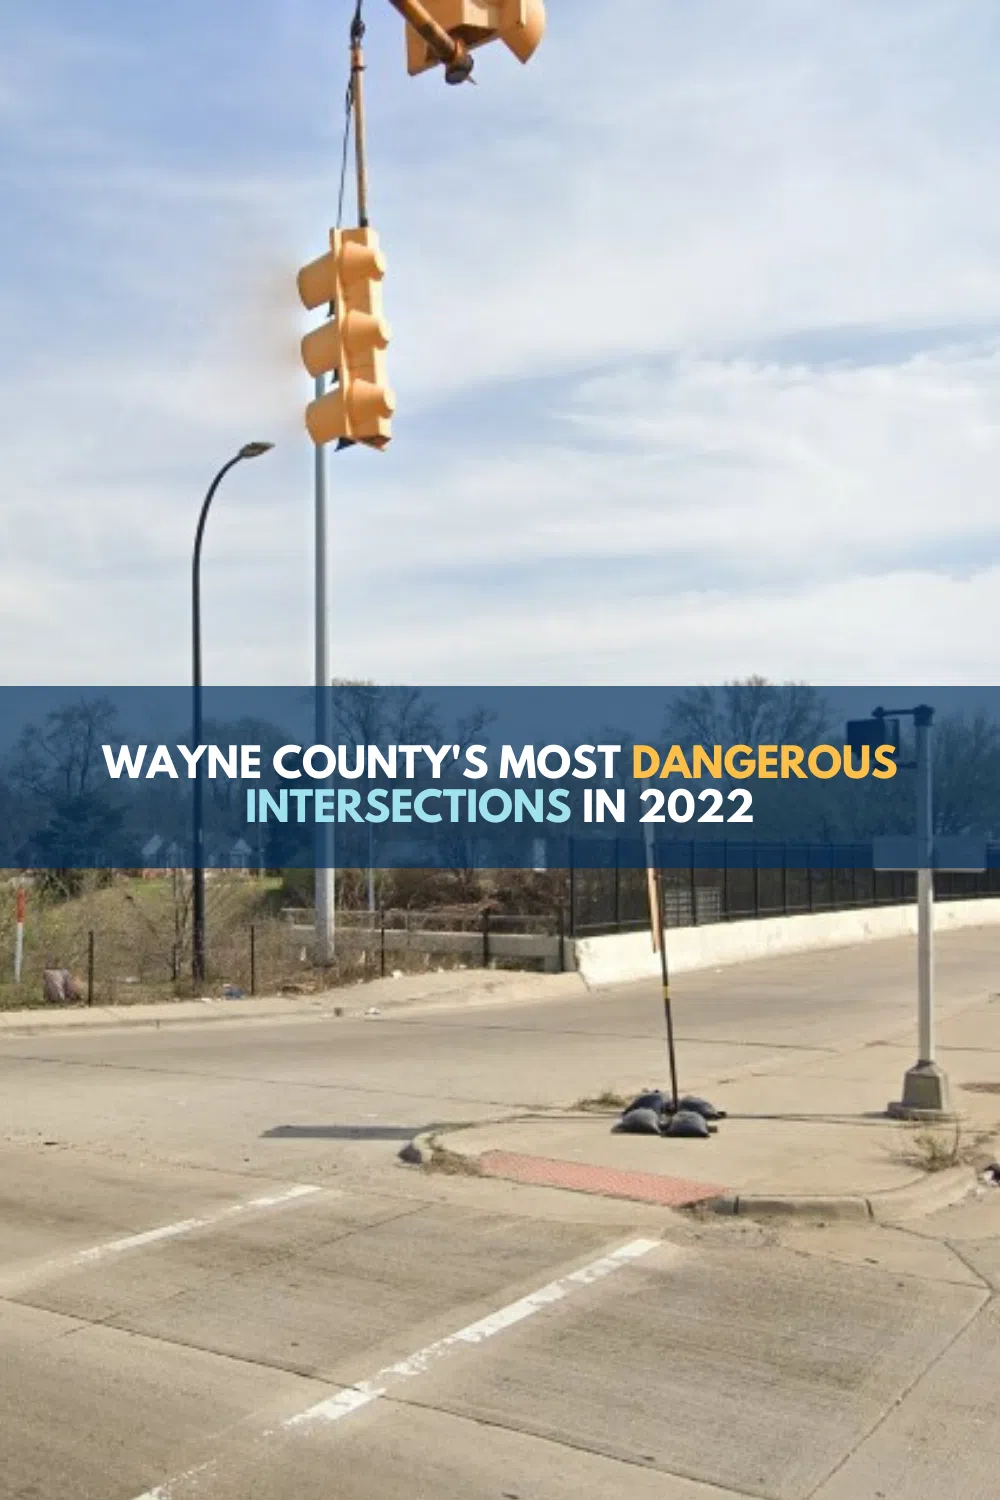 Wayne County’s Most Dangerous Intersections in 2022